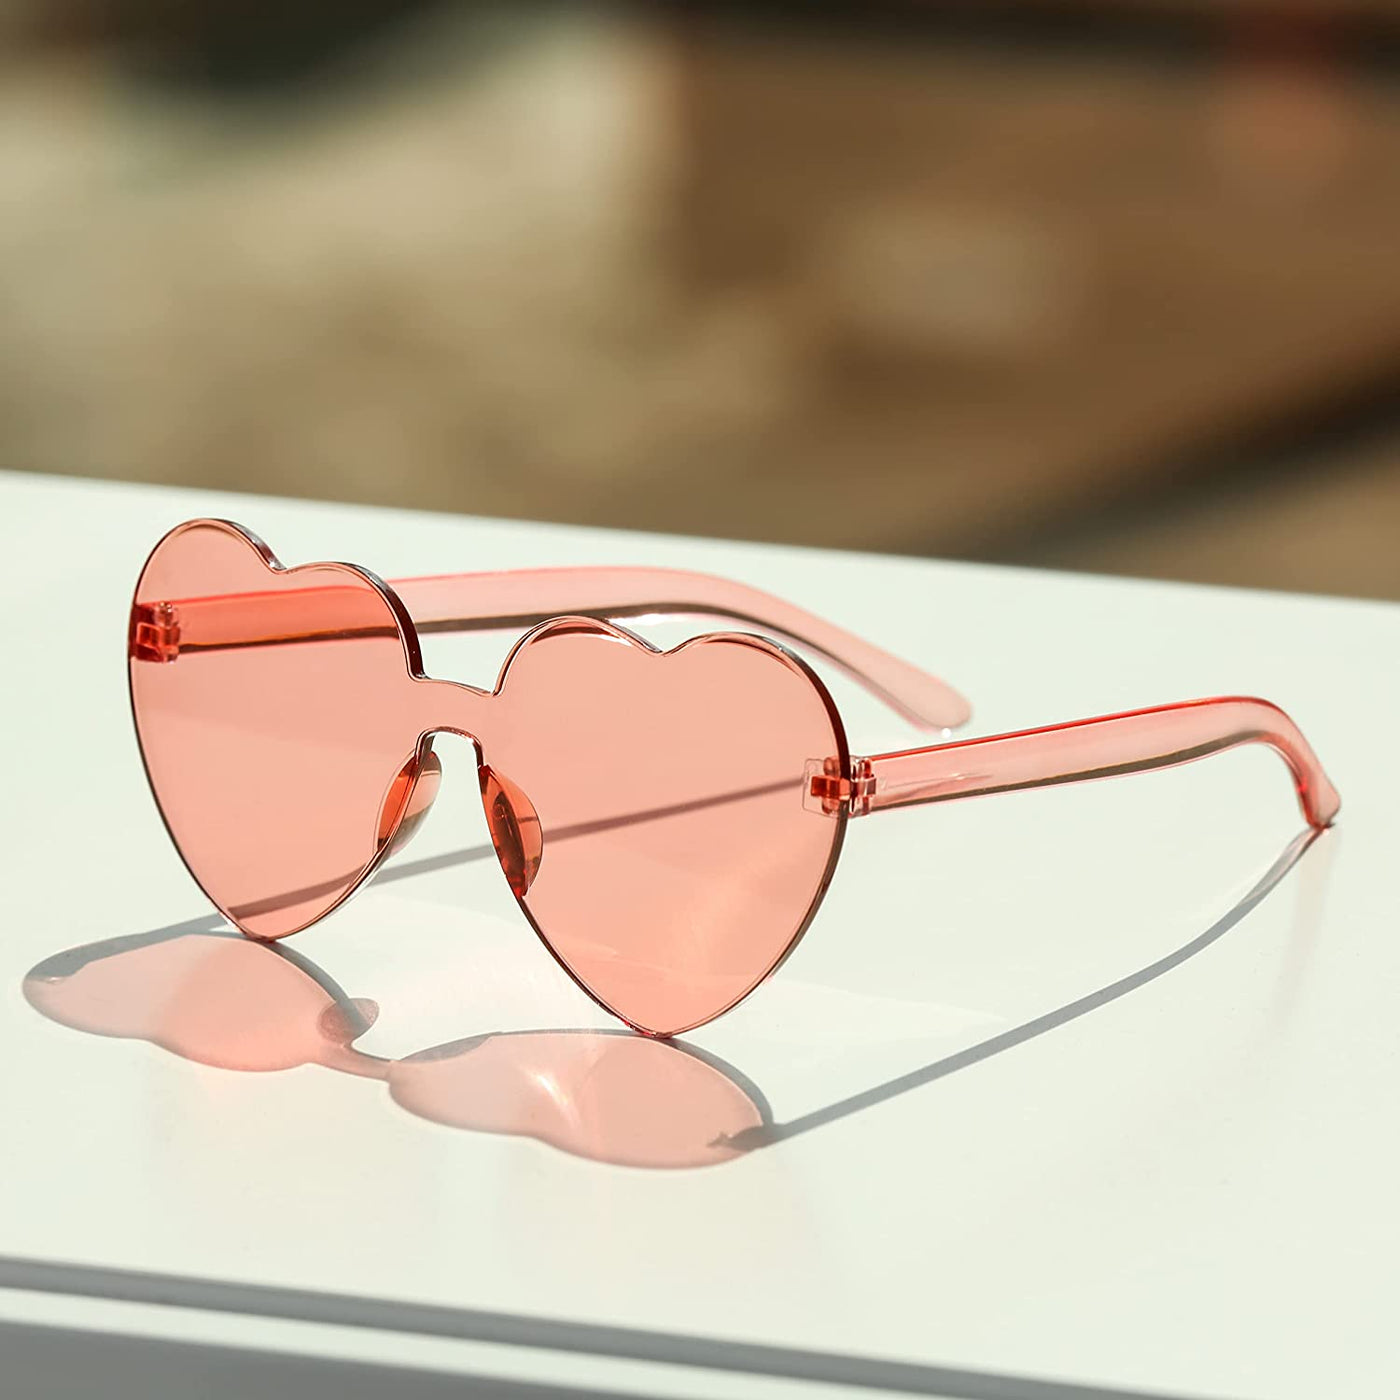 4E's Novelty 2 Pack Heart Shaped Sunglasses for Women - Transparent Light Pink & Hot Pink Color Rimless Glasses, Valentines Party Fashion Accessories